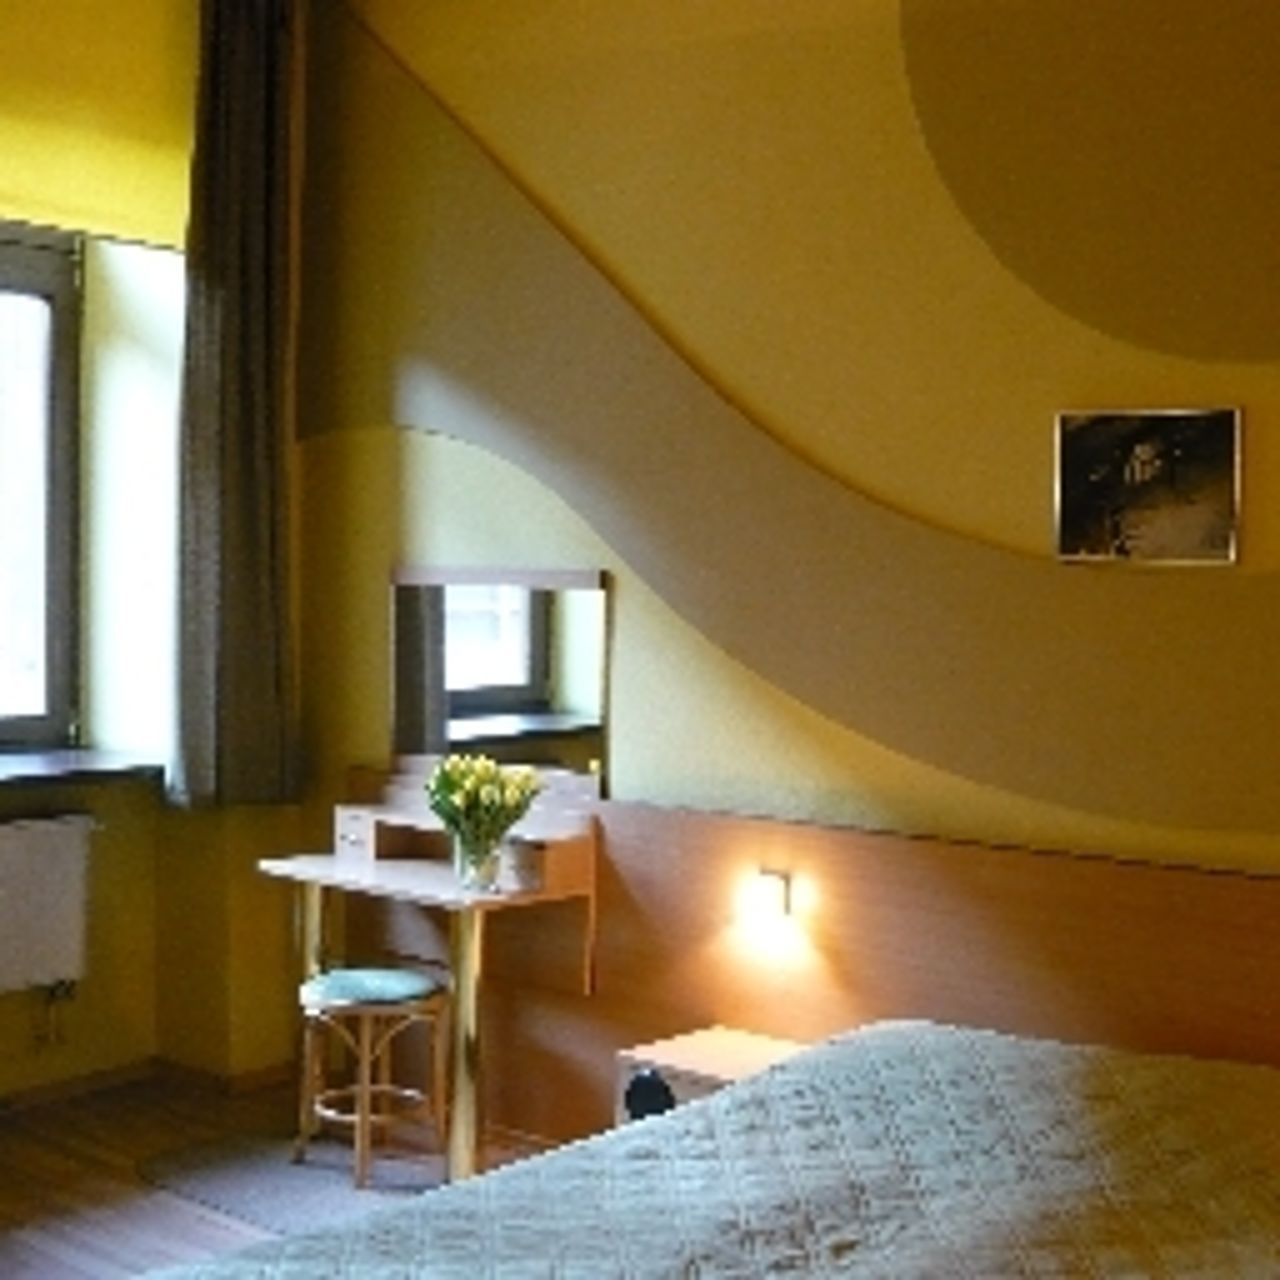 Hotel Jordan Guest Rooms - Kraków - Great prices at HOTEL INFO